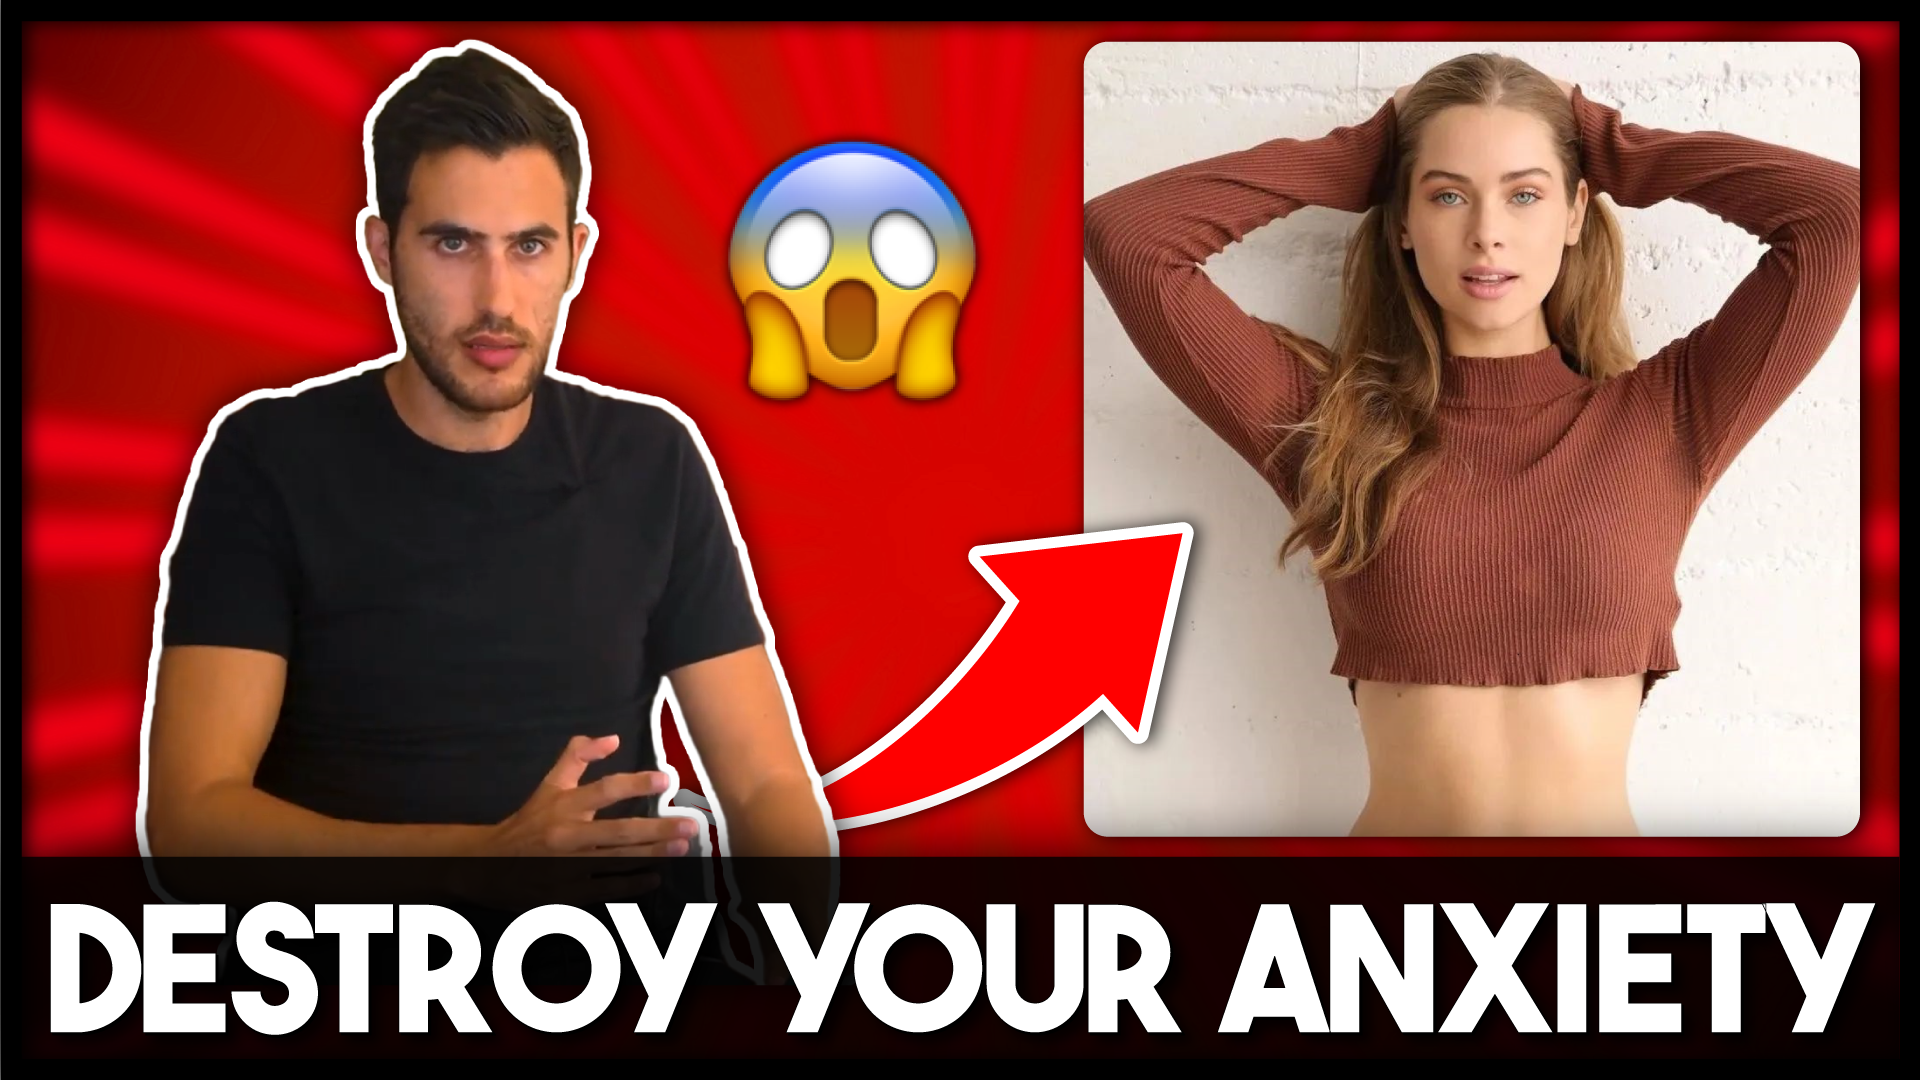 How To Deal With Anxiety When Approaching Hotter Women